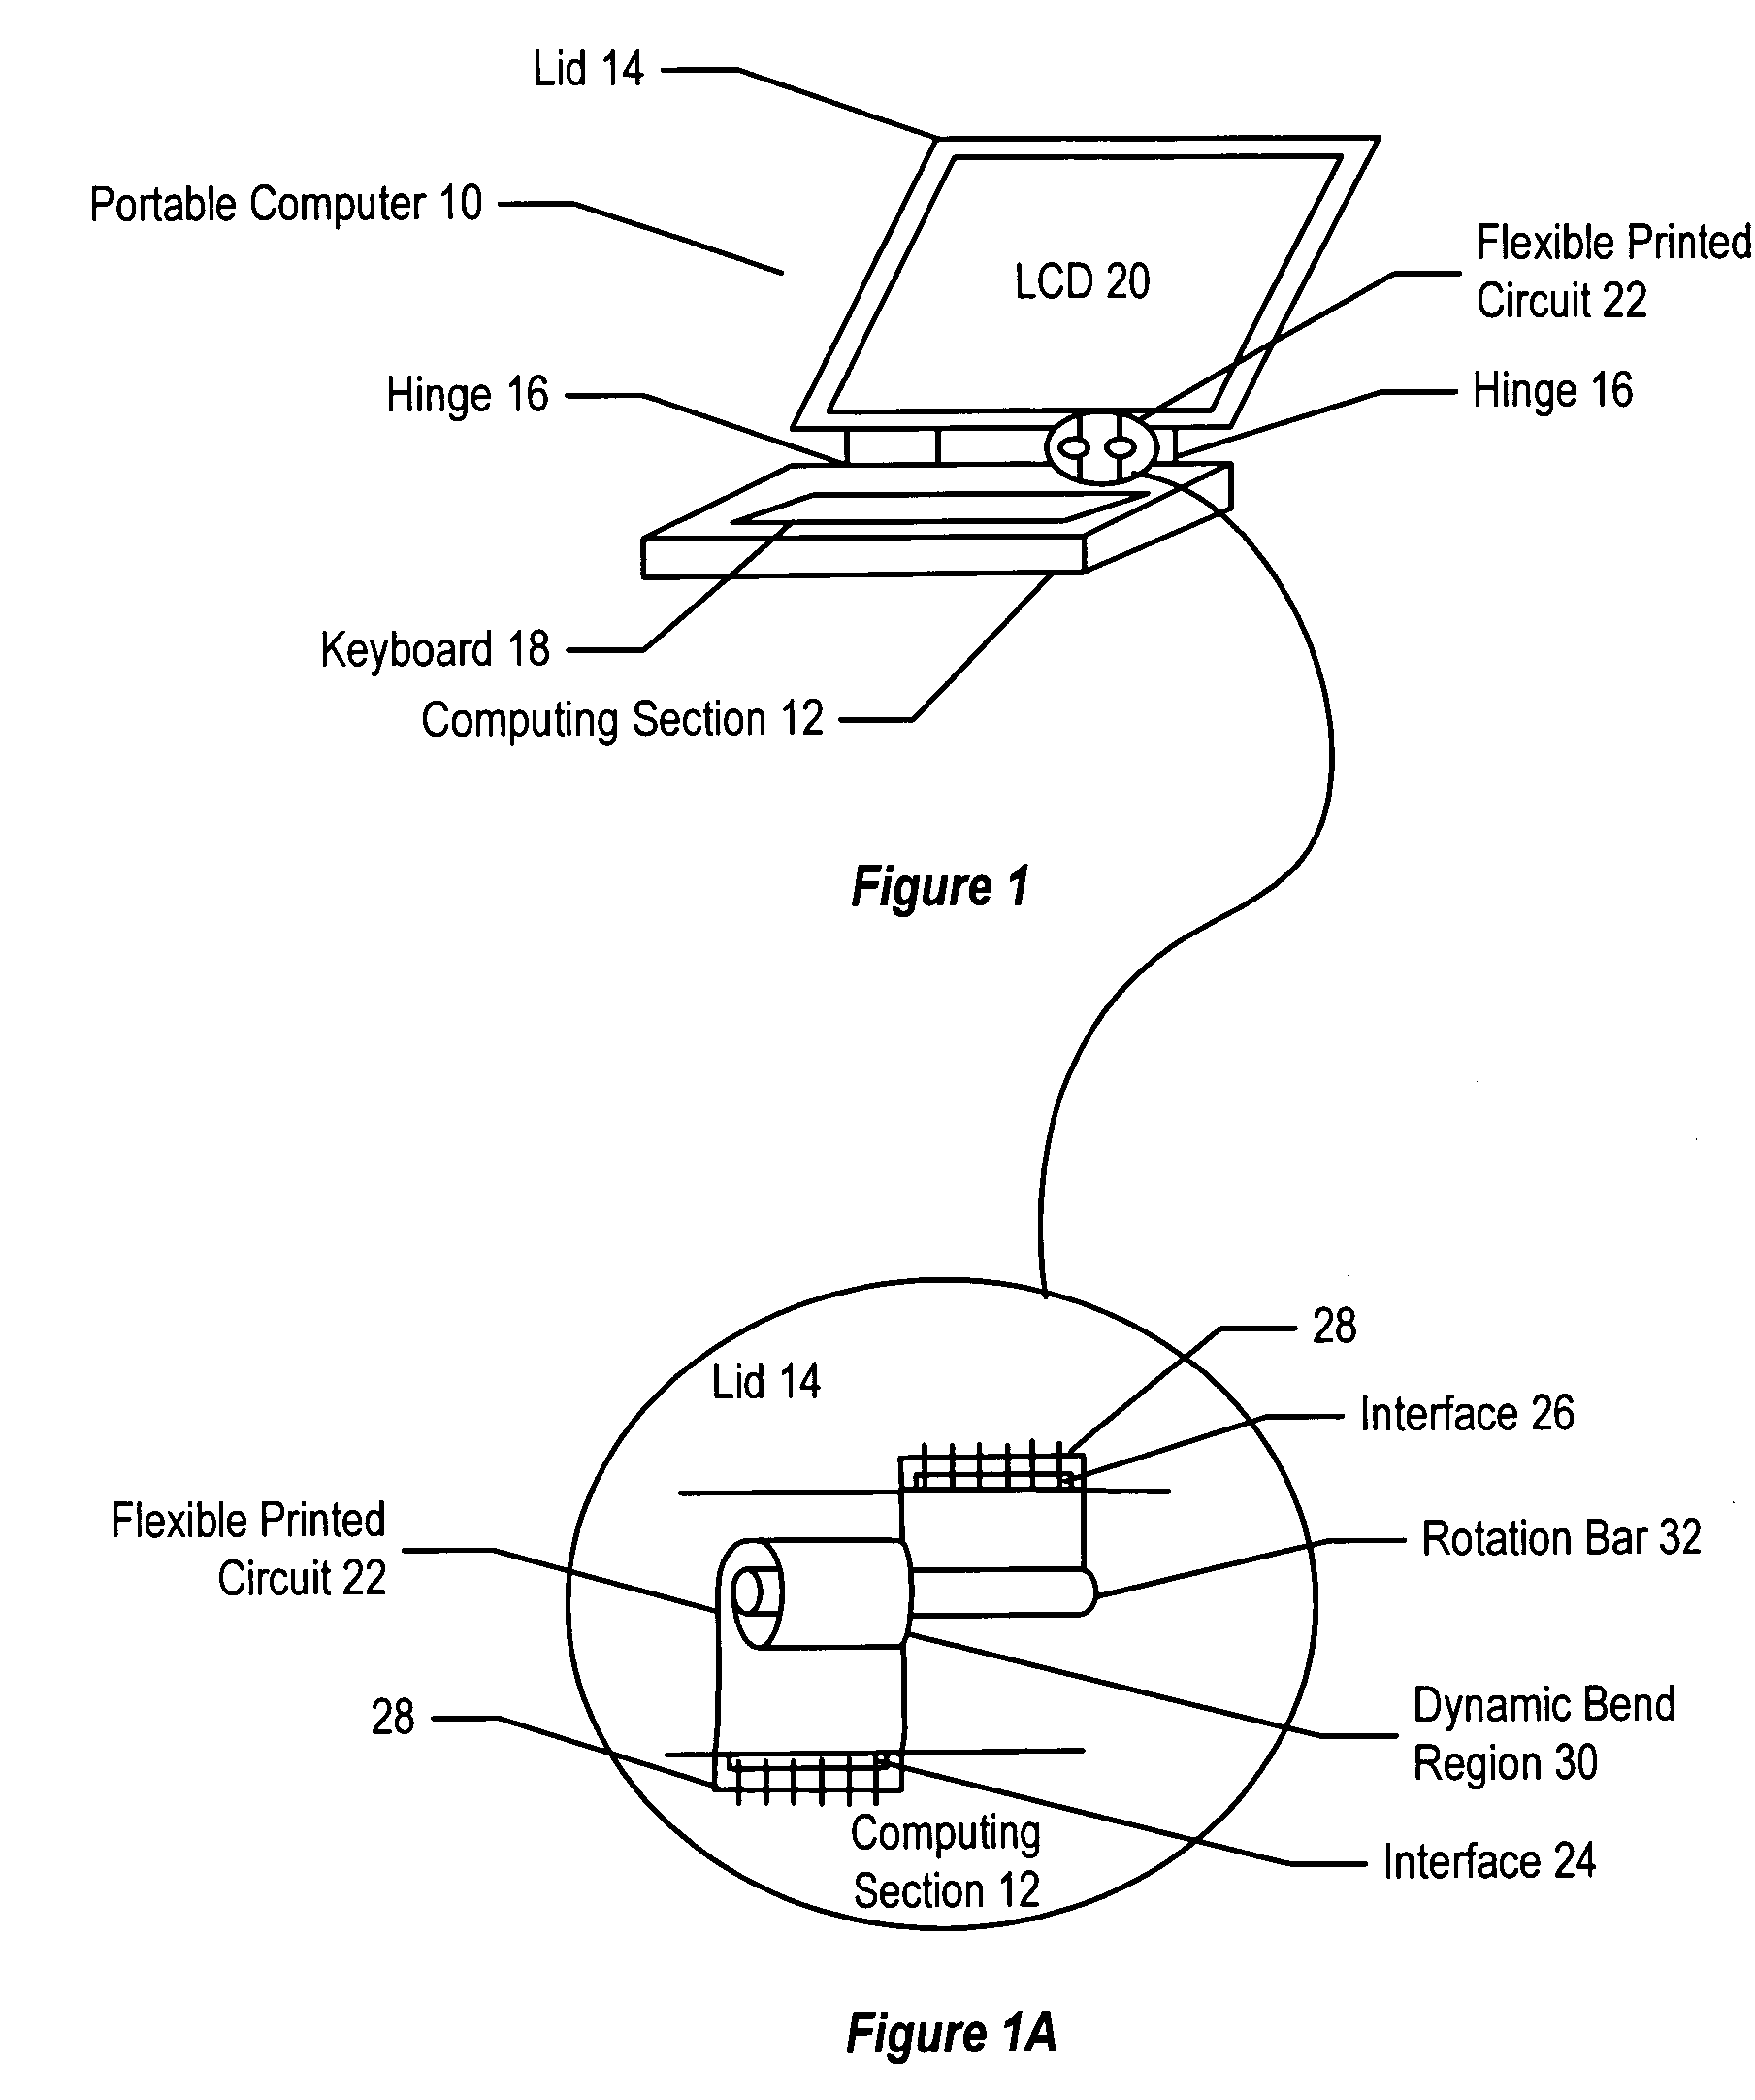 System and method for flexible circuits